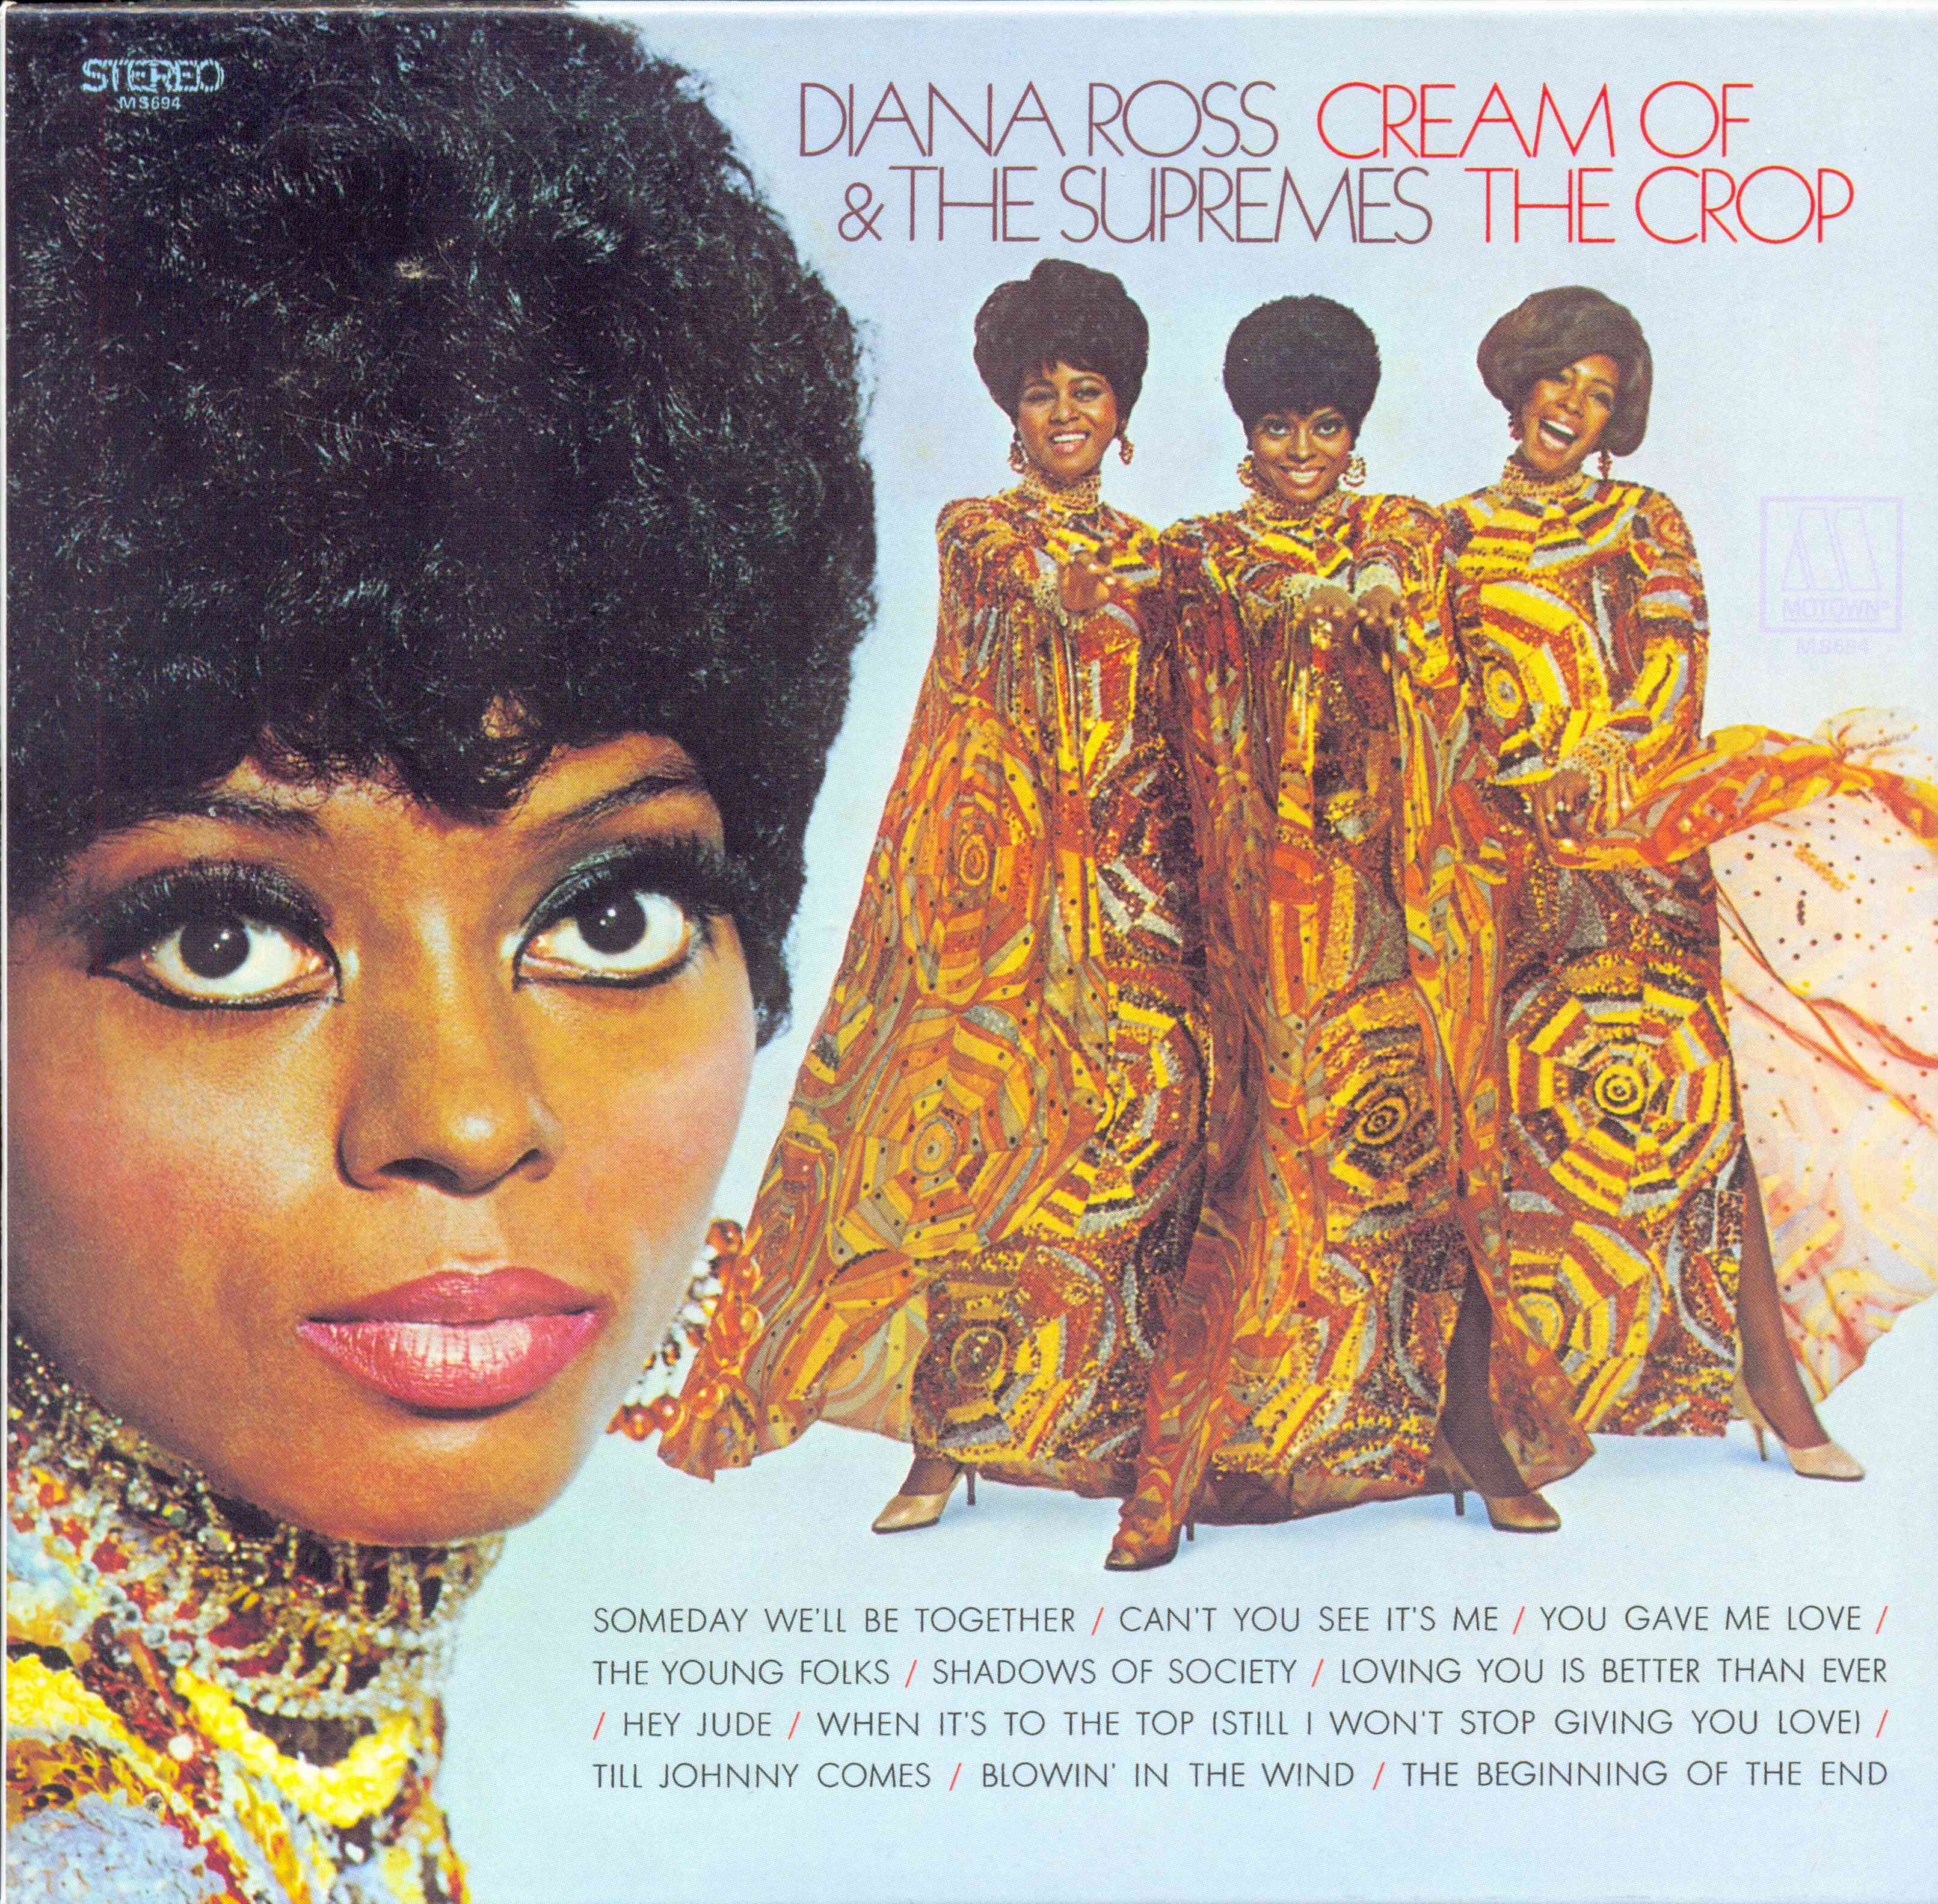 1969 - Diana Ross & The Supremes - Cream Of The Crop